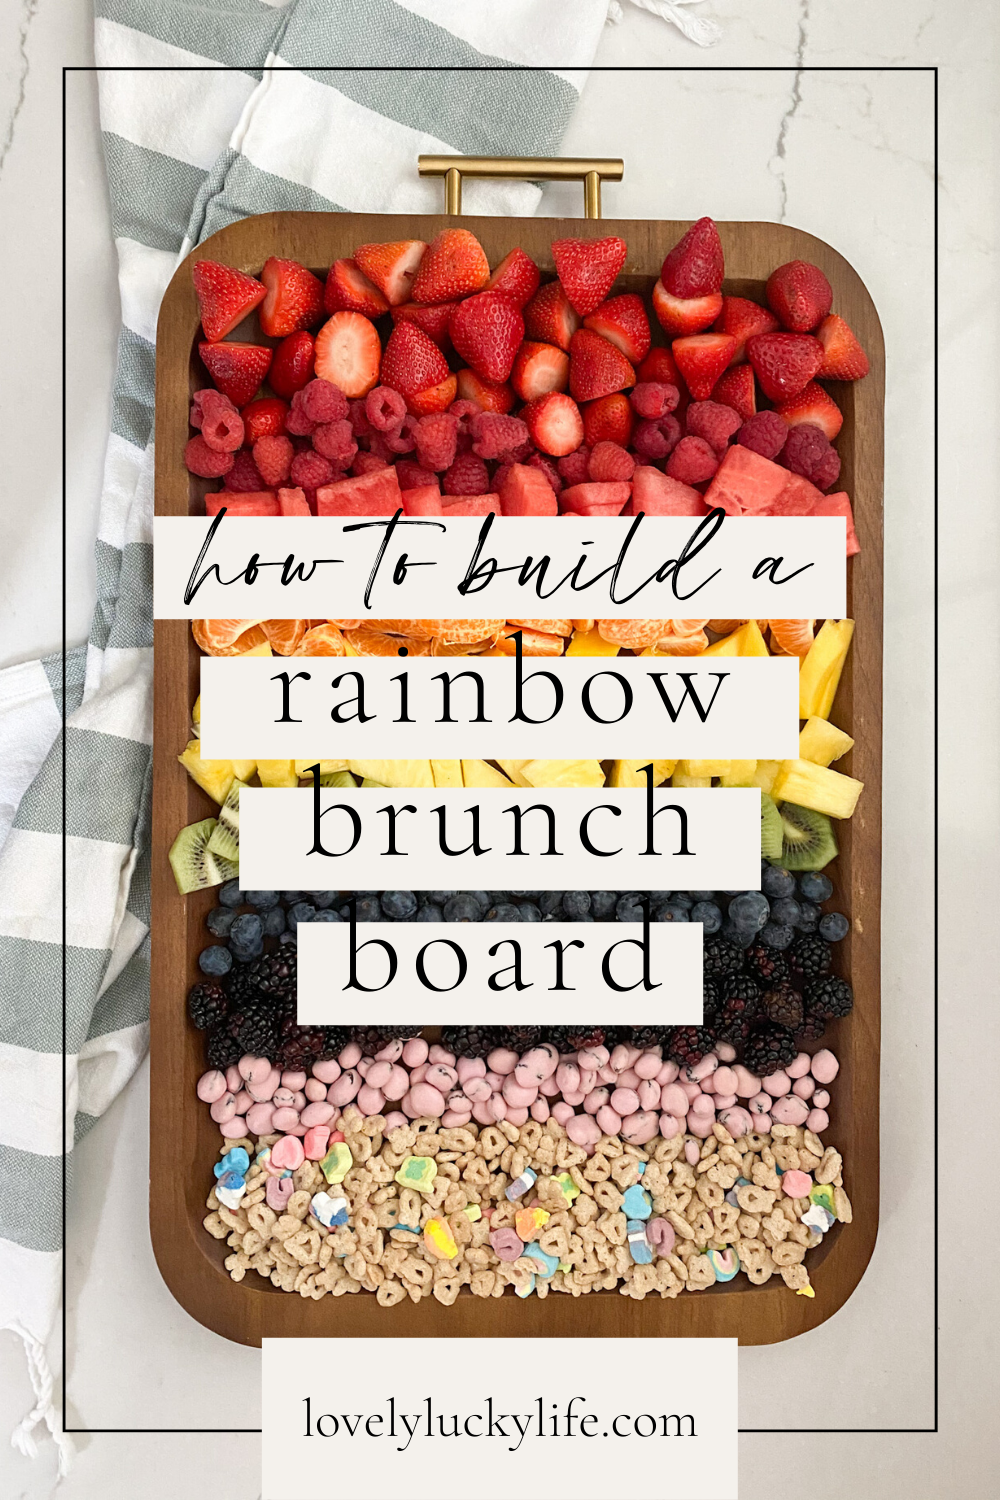 How To Build a Rainbow Brunch Board